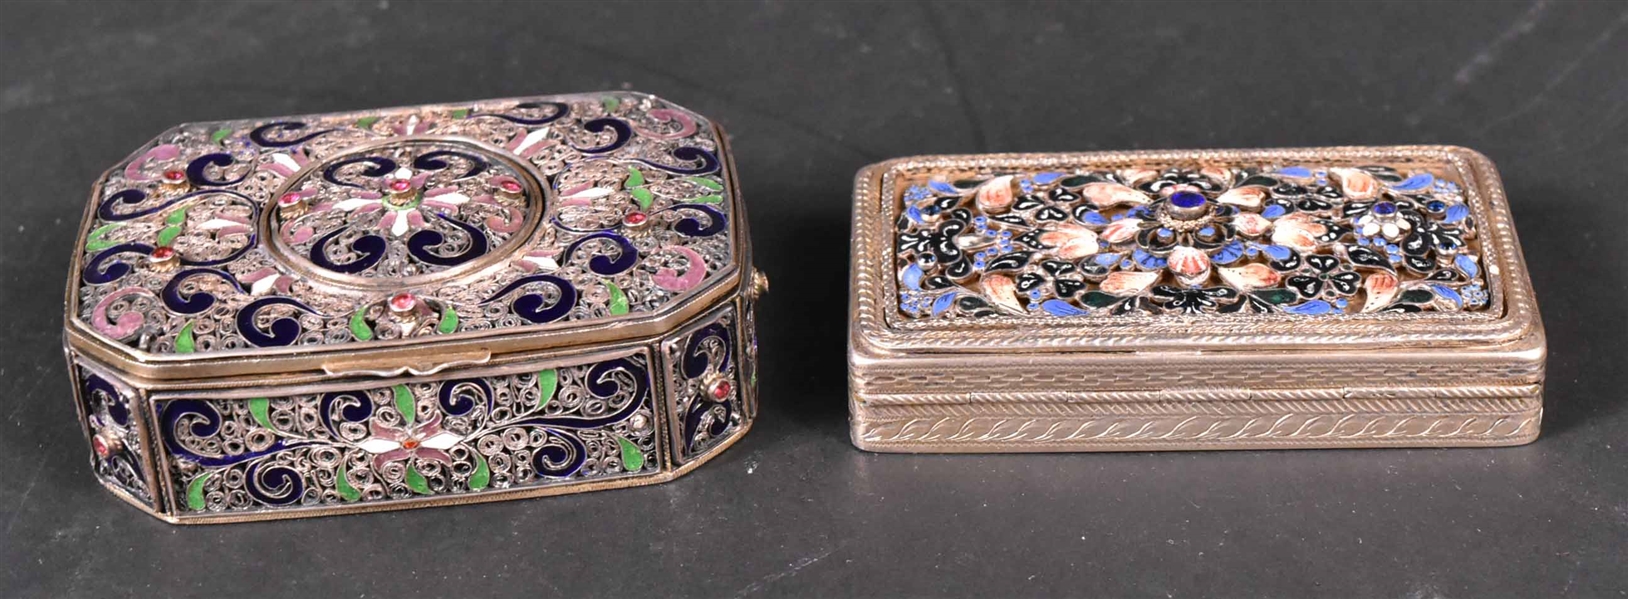 Two Continental Silver Enamel & Jeweled Boxes